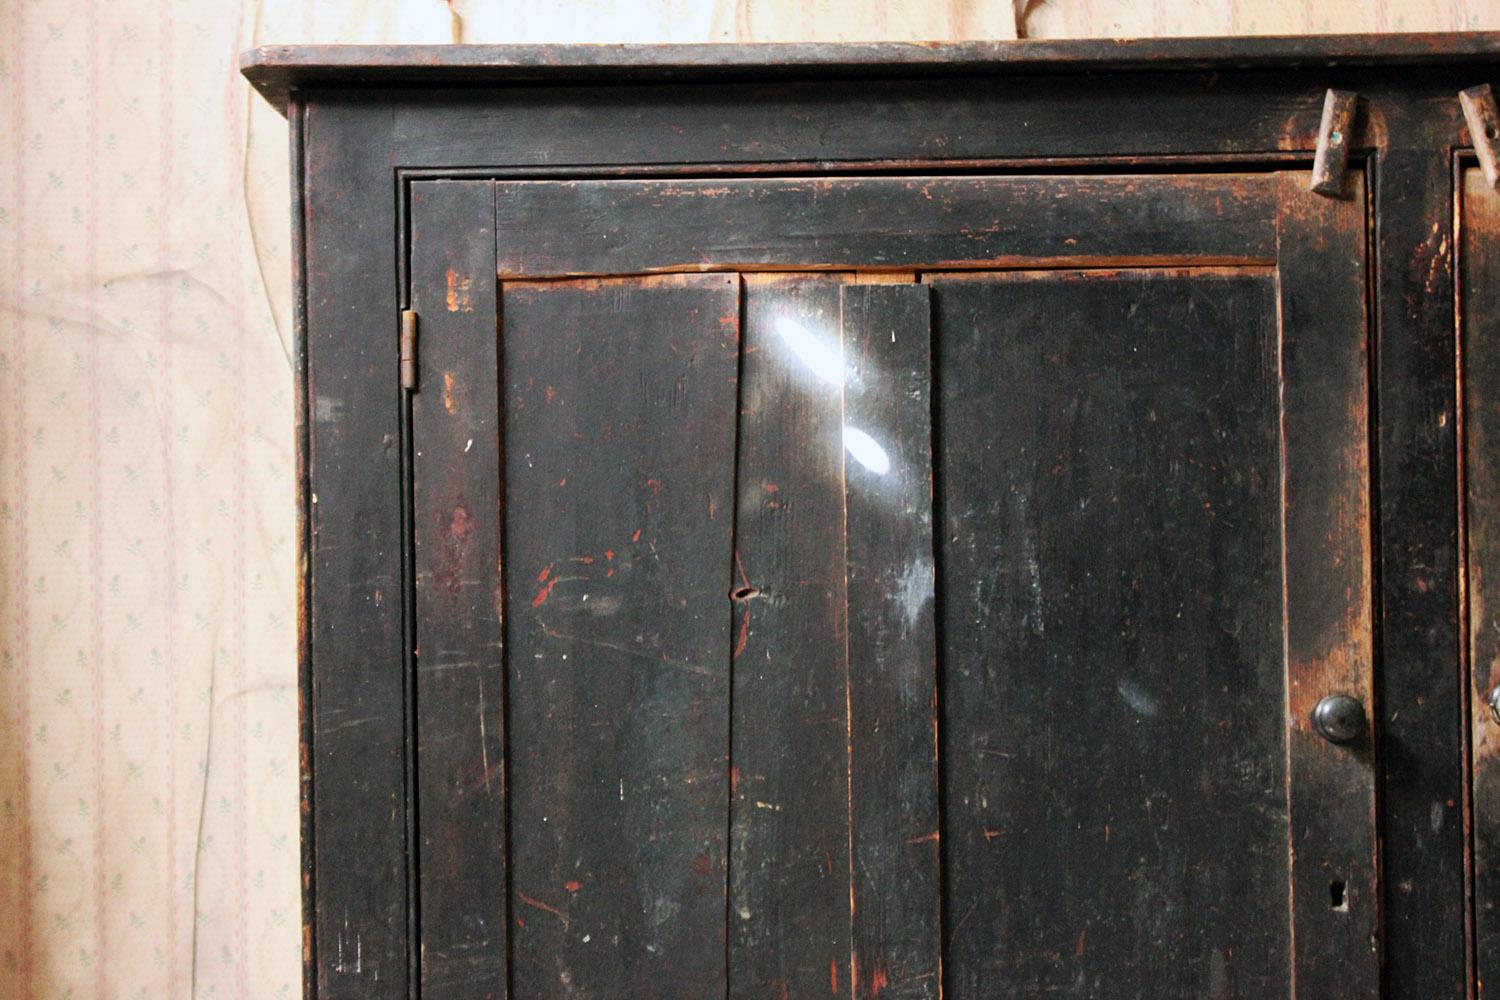 The late Victorian period pine carcass of relatively large size, formerly having been used as a food or larder cupboard with one flank being air ventilated with mesh, the other being panelled, showing the original period black painted finish now